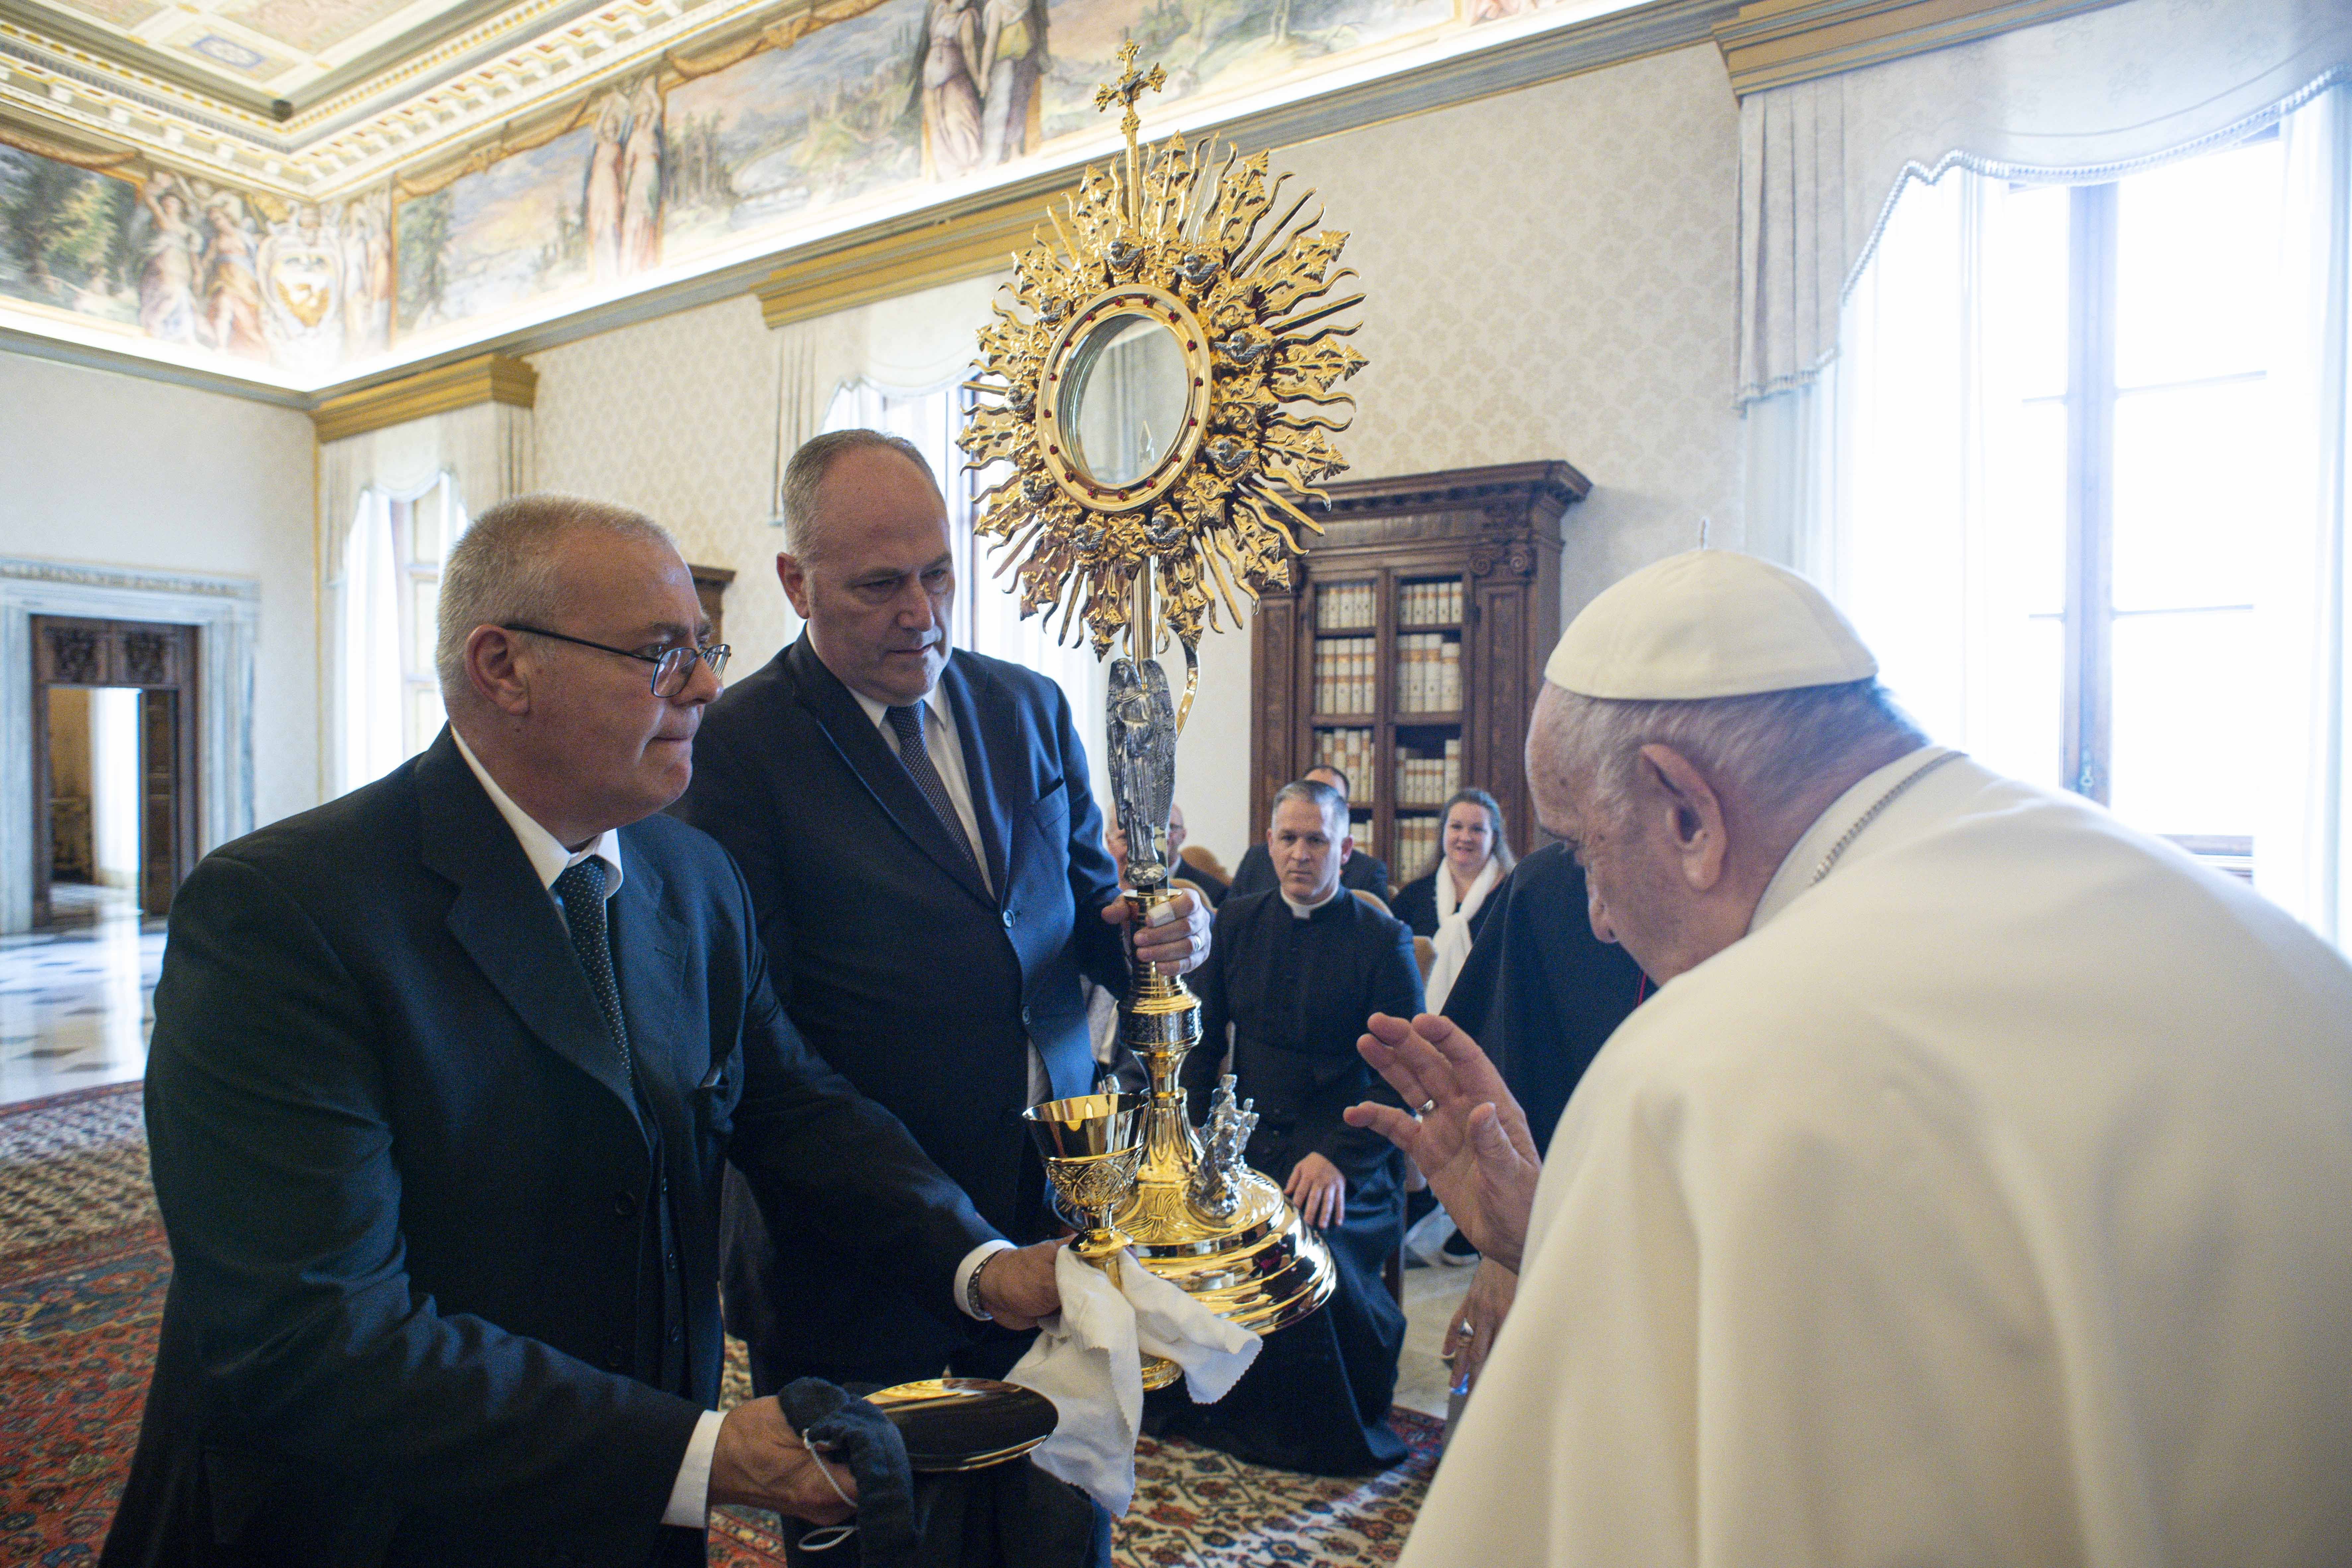 Pope Francis blesses a 4-foot-tall monstrance, a chalice and a paten during an audience with members of the organizing committees of the U.S. National Eucharistic Congress and Eucharistic Revival in the library of the Apostolic Palace at the Vatican June 19. (CNS/Vatican Media)